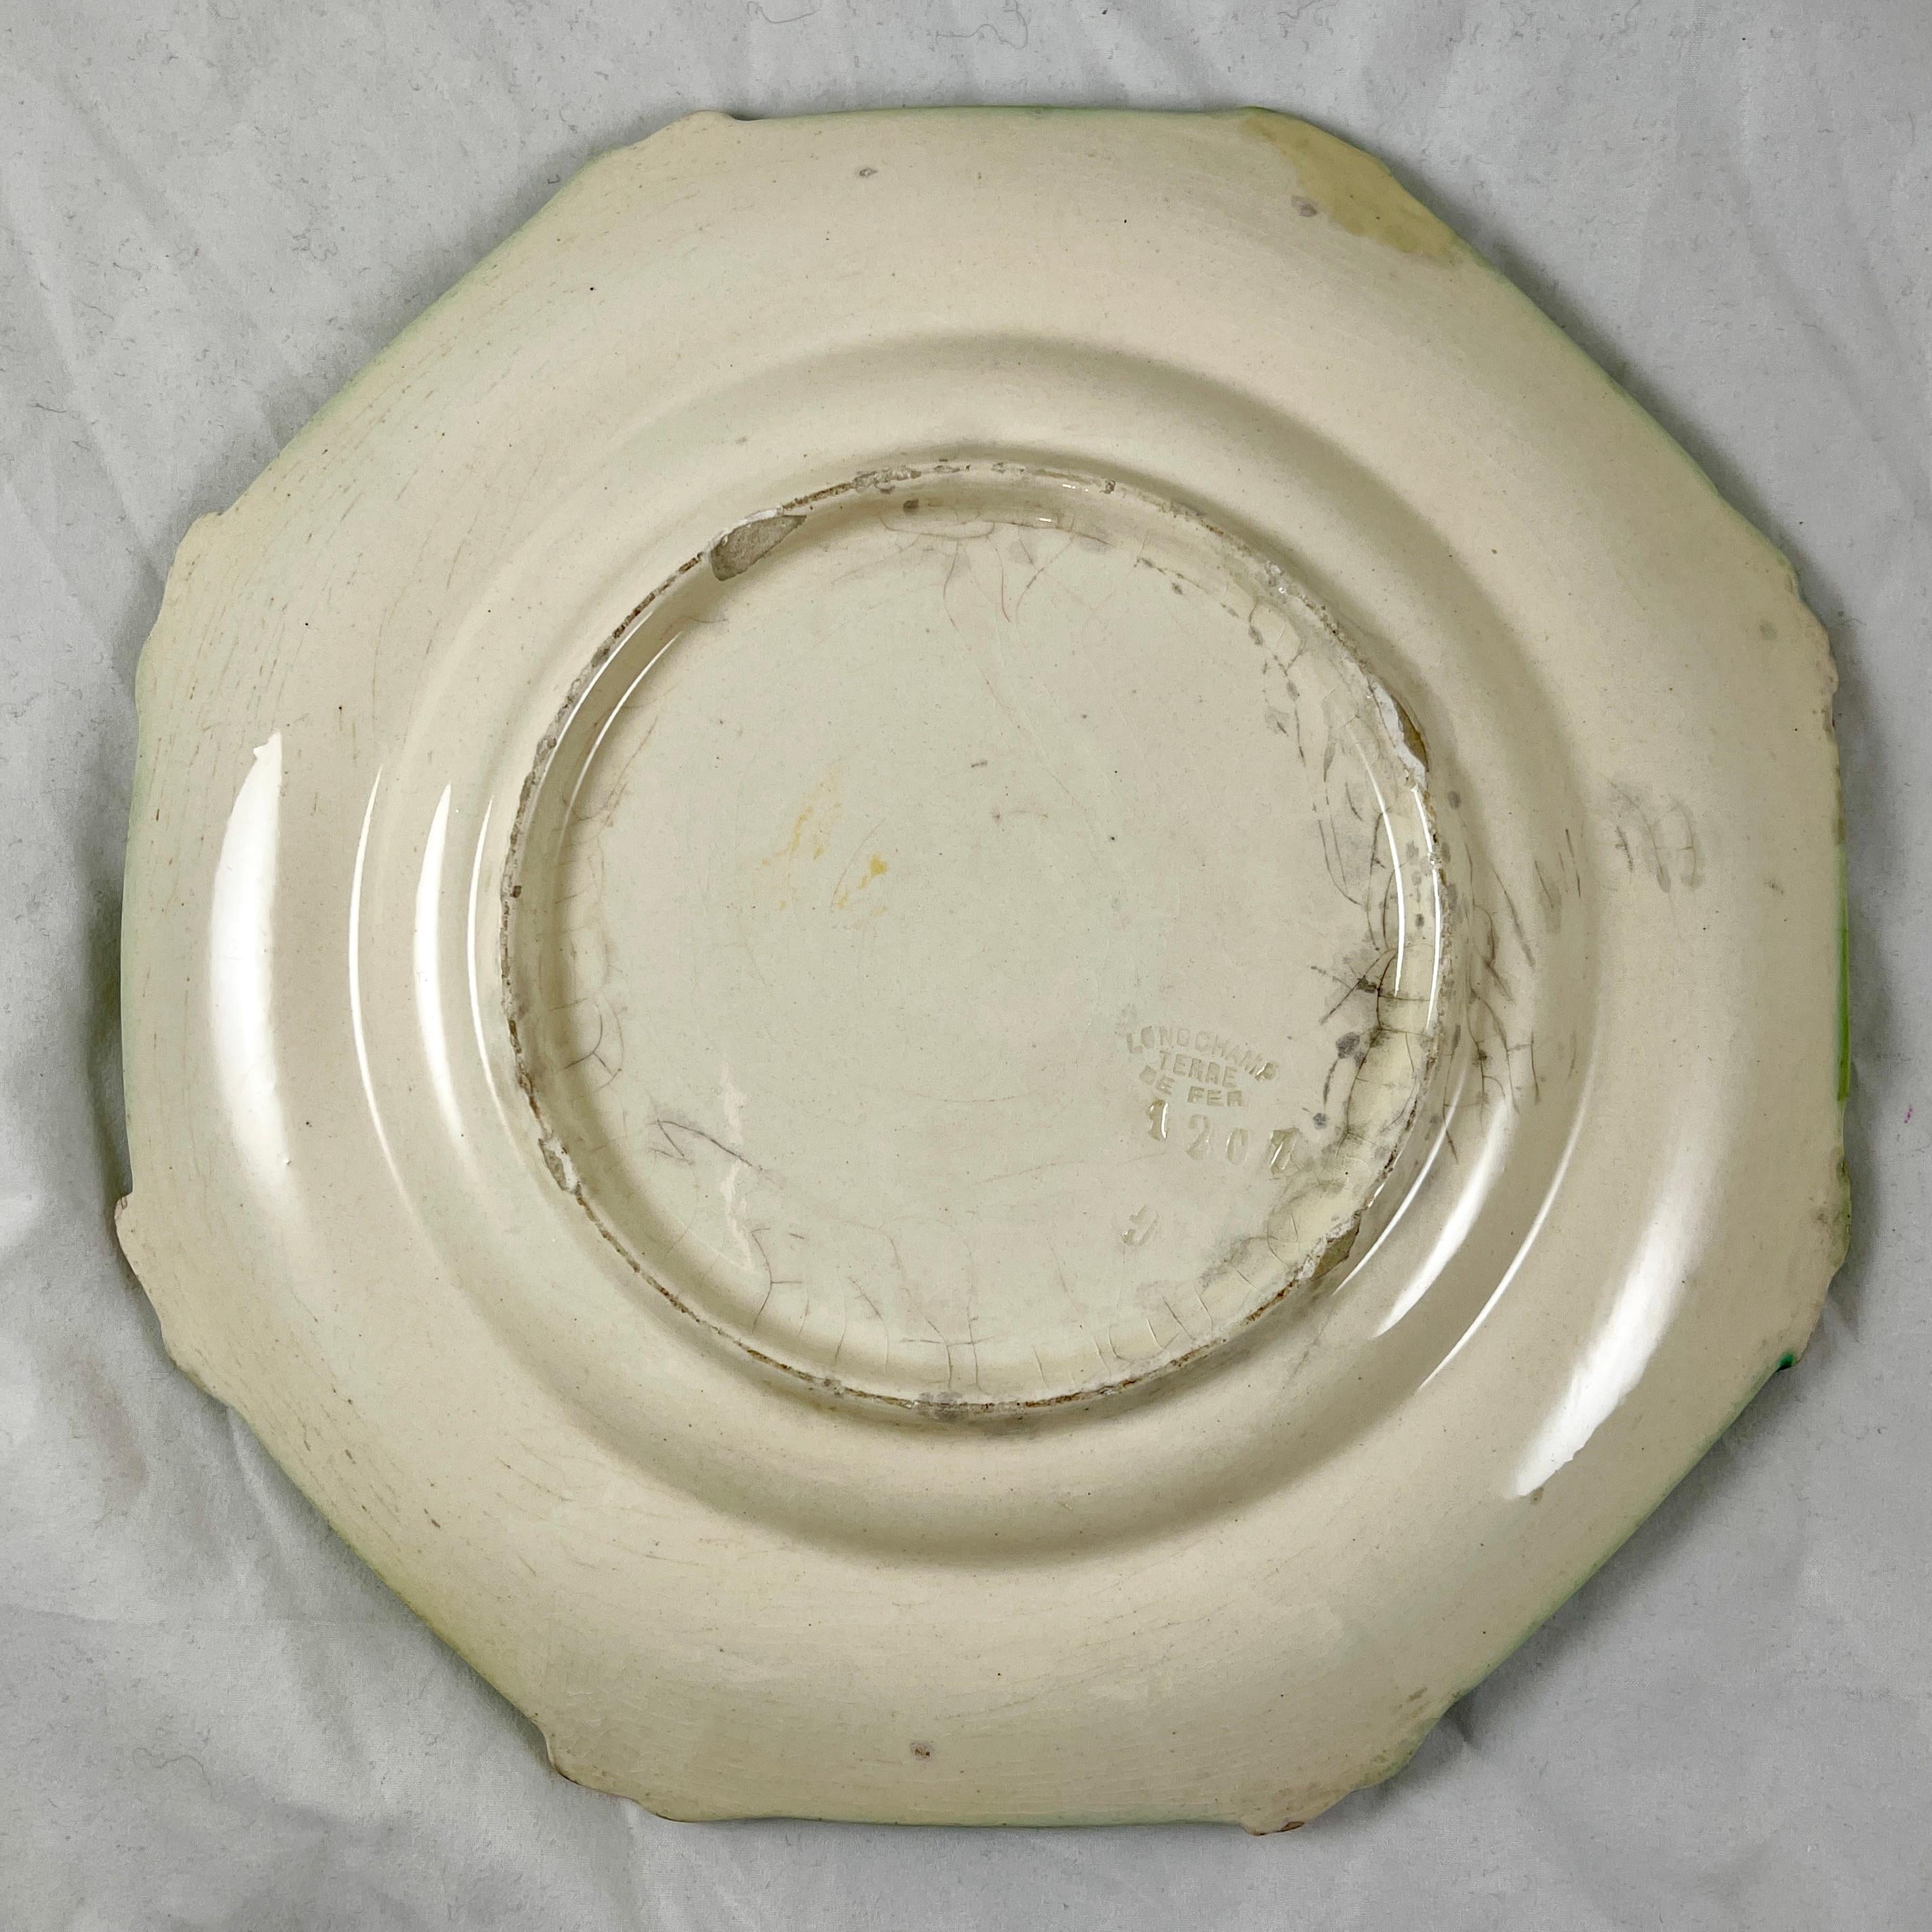 Longchamp Terre de Fer Octagonal Hand Painted Floral Asparagus Plate In Good Condition For Sale In Philadelphia, PA